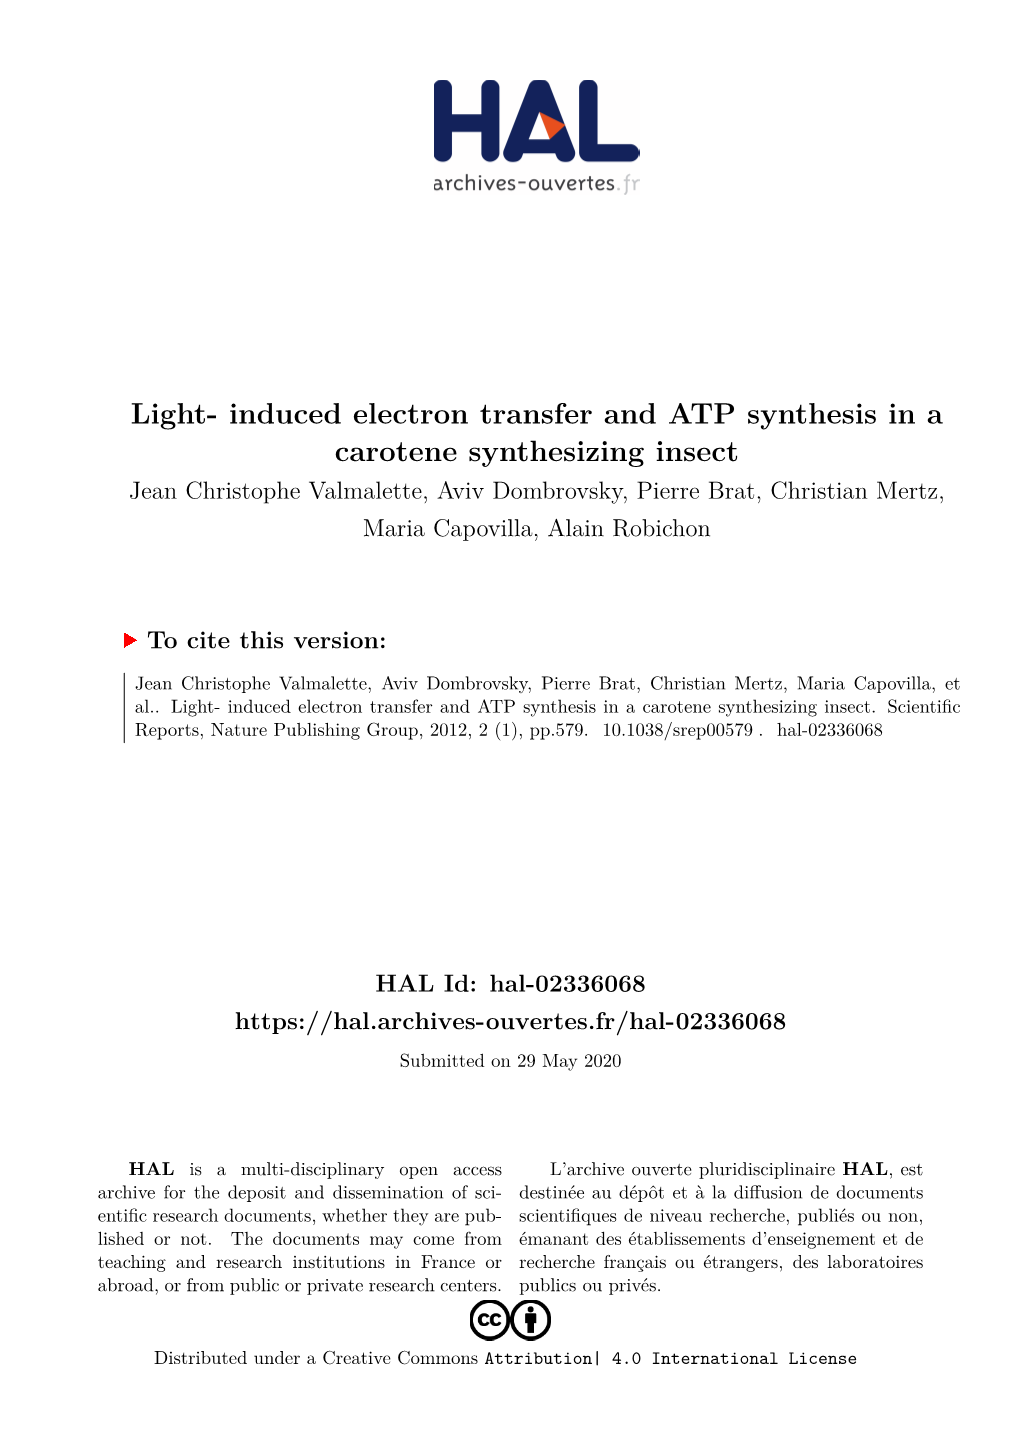 Light- Induced Electron Transfer and ATP Synthesis in a Carotene Synthesizing Insect